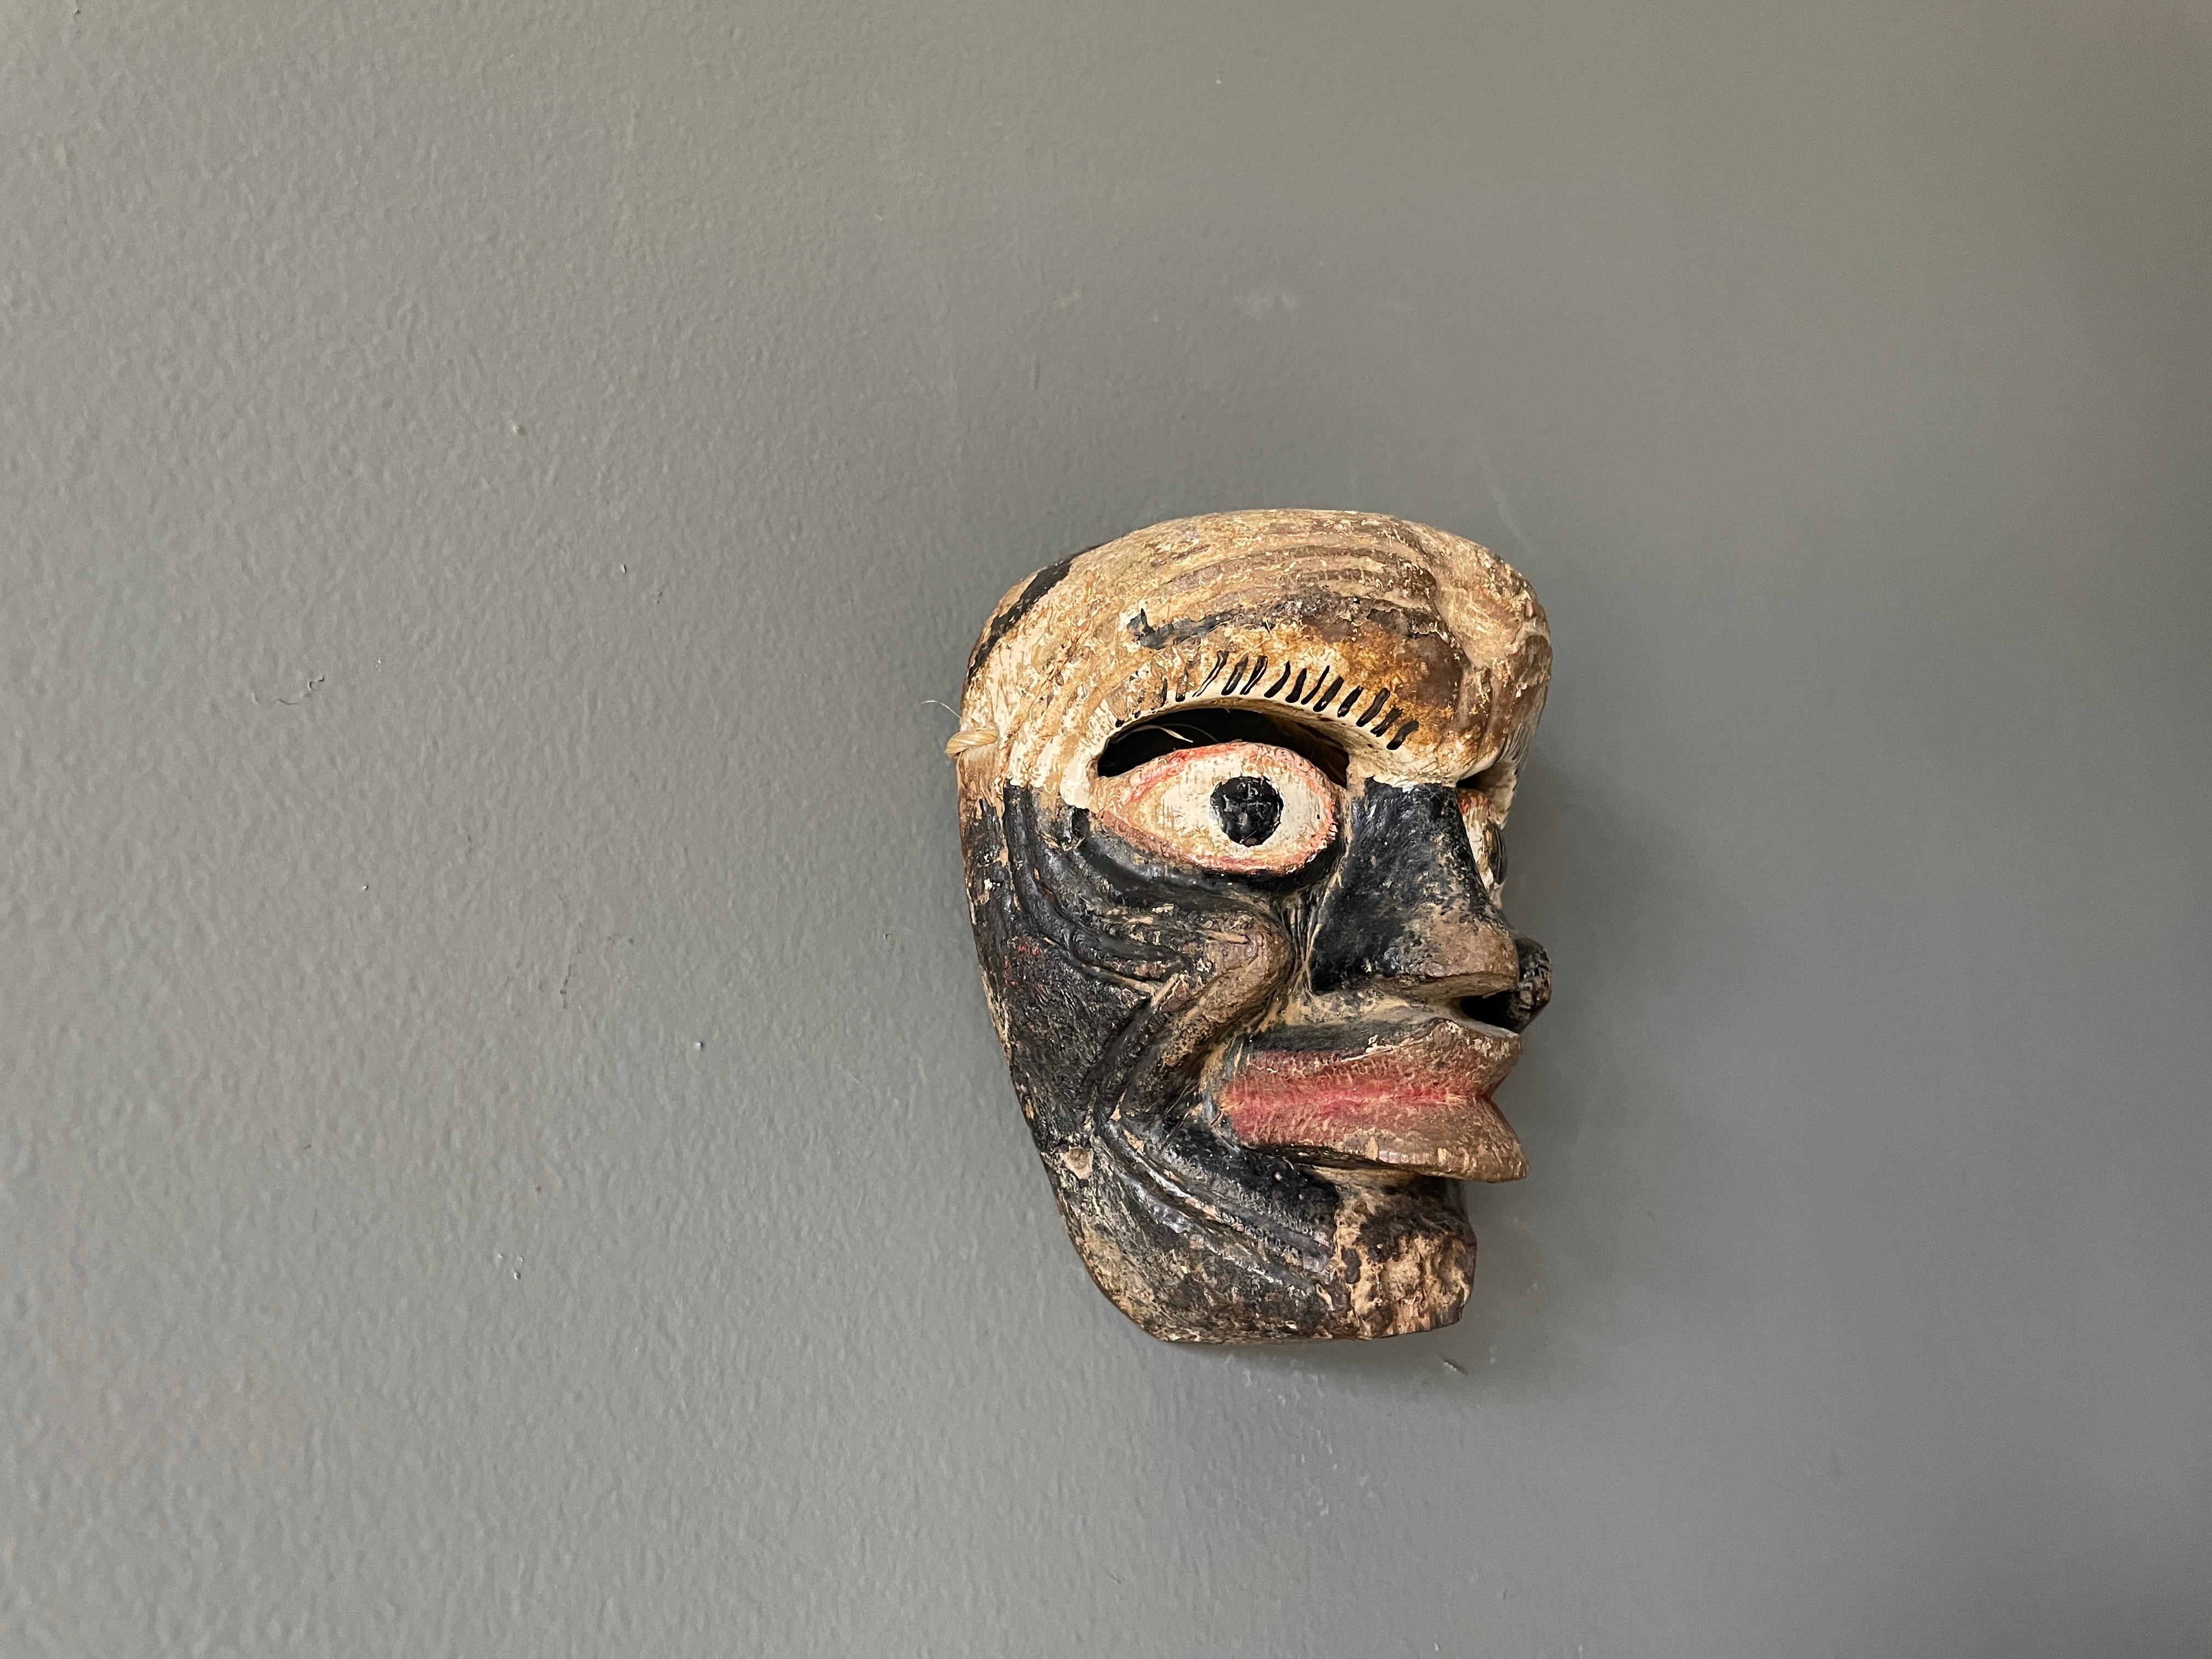 Vintage hand carved tribal ceremonial mask. Small in stature, most likely fashioned for a child. A one of a kind conversation piece in any room it's placed in.